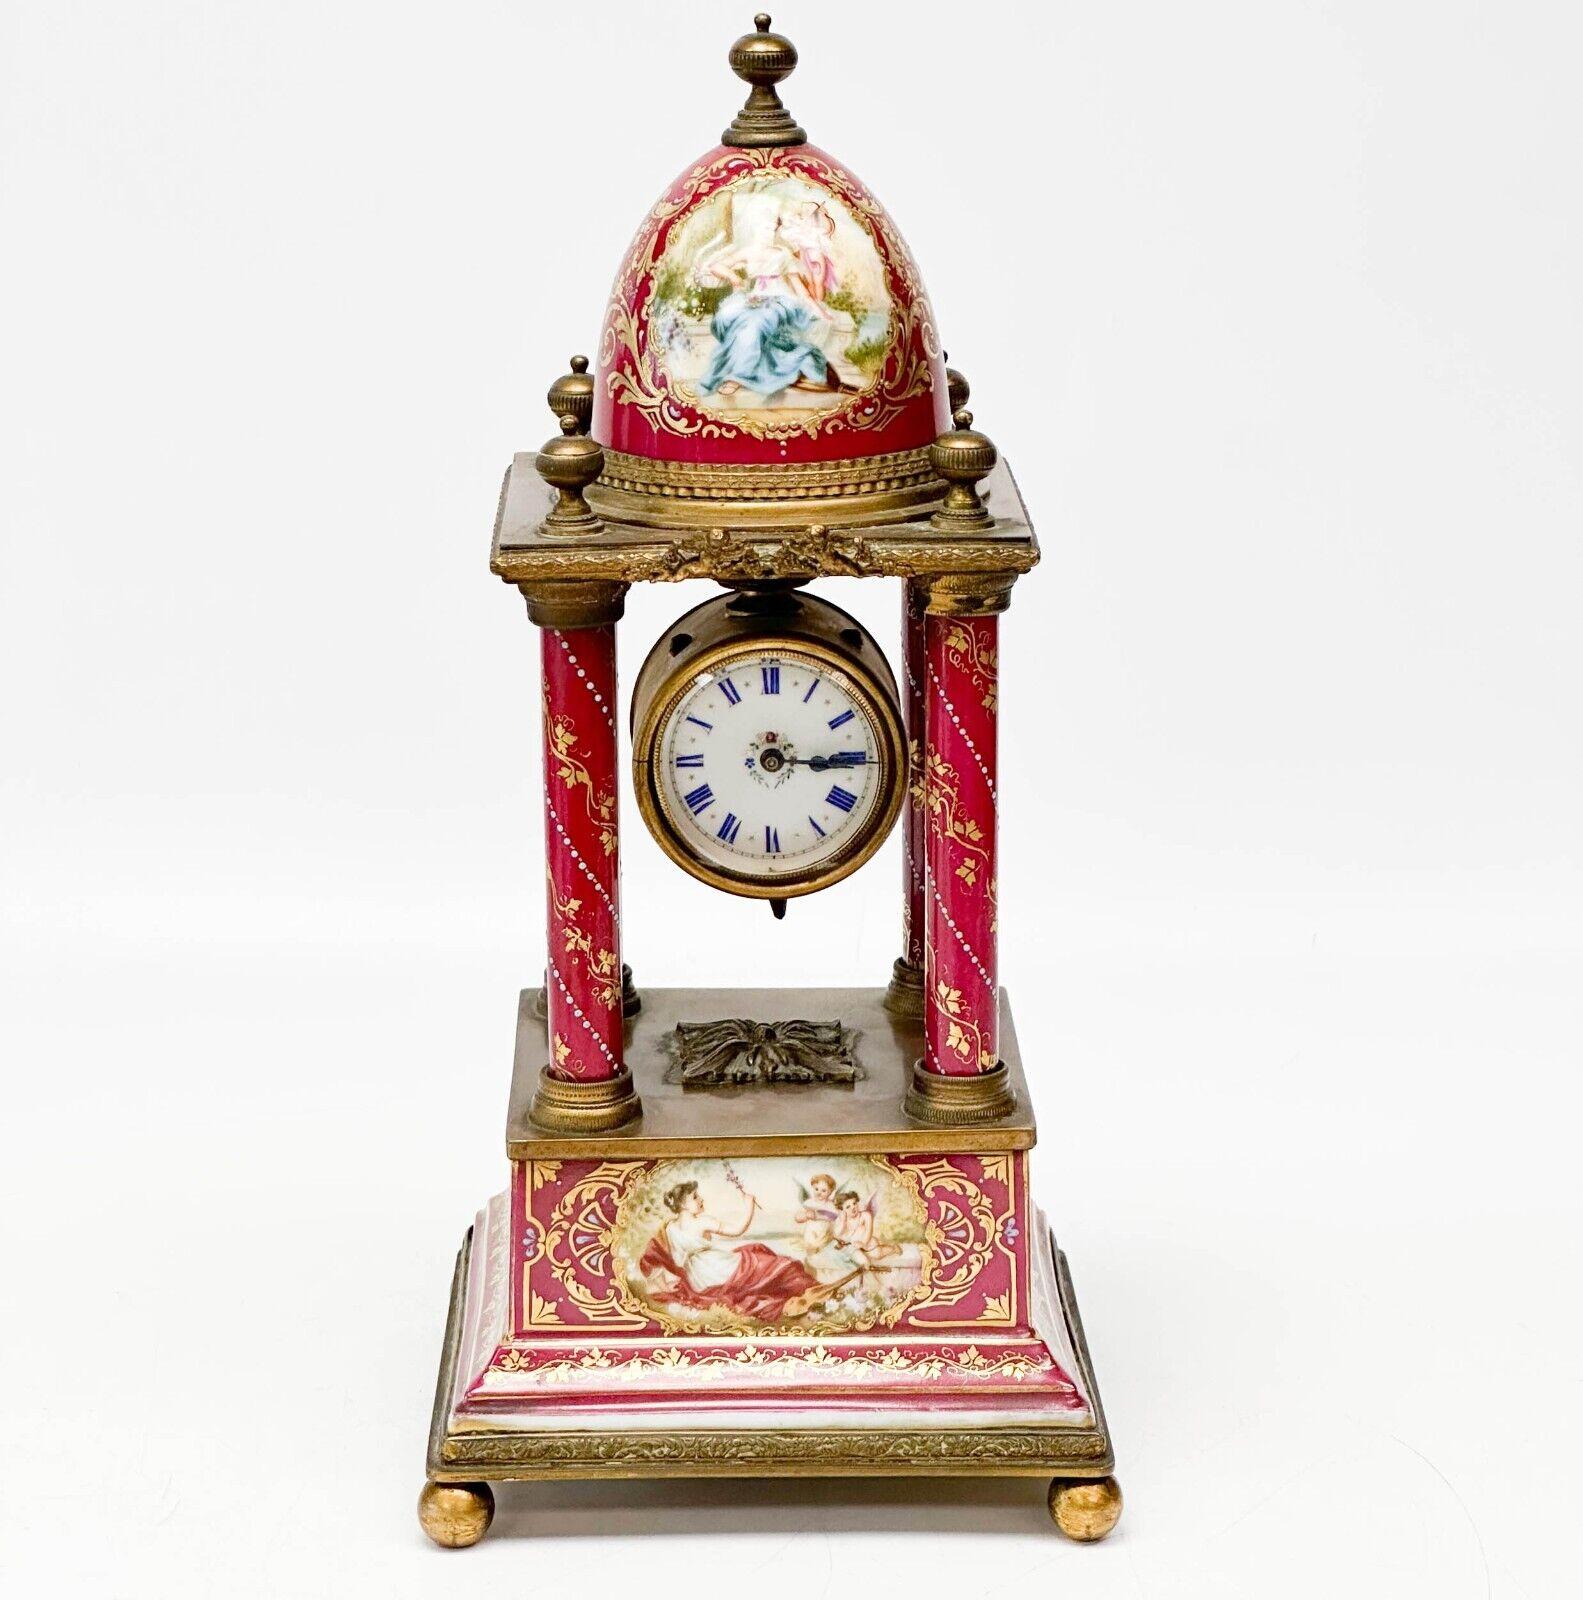  Royal Vienna Austria hand painted porcelain gilt bronze mounted mantle clock, circa 1900. A maroon red ground with gilt foliate decoration and raised blue beaded enamel accents to the sides. Hand painted scenes of figures to the front and to dome.